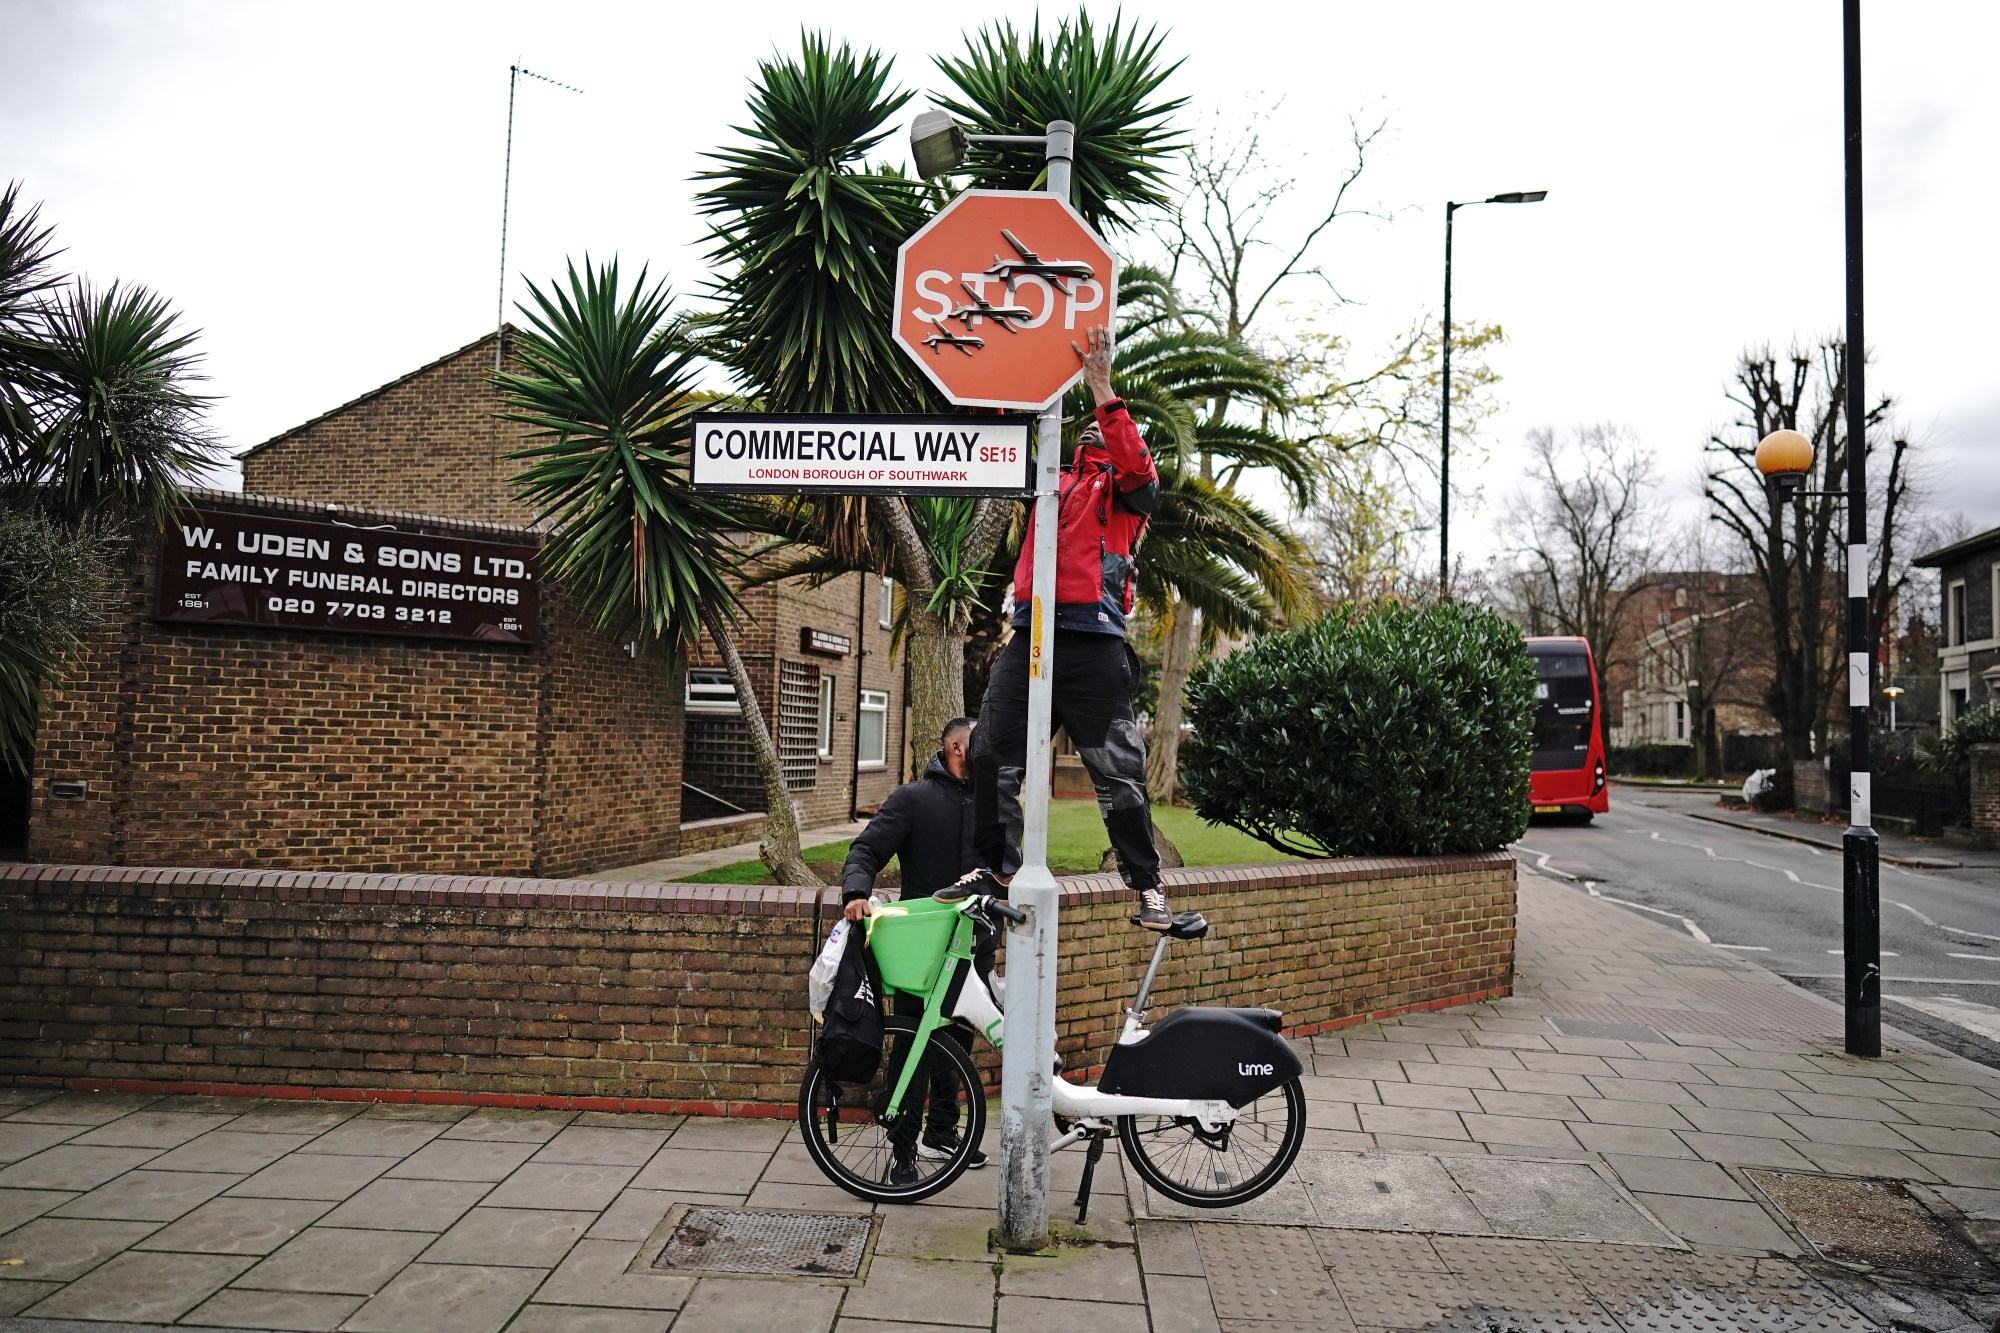 People remove a piece of art work by Banksy, which shows what looks like three drones on a traffic stop sign, which was unveiled at the intersection of Southampton Way and Commercial Way in Peckham, south east London. Picture date: Friday December 22, 2023.